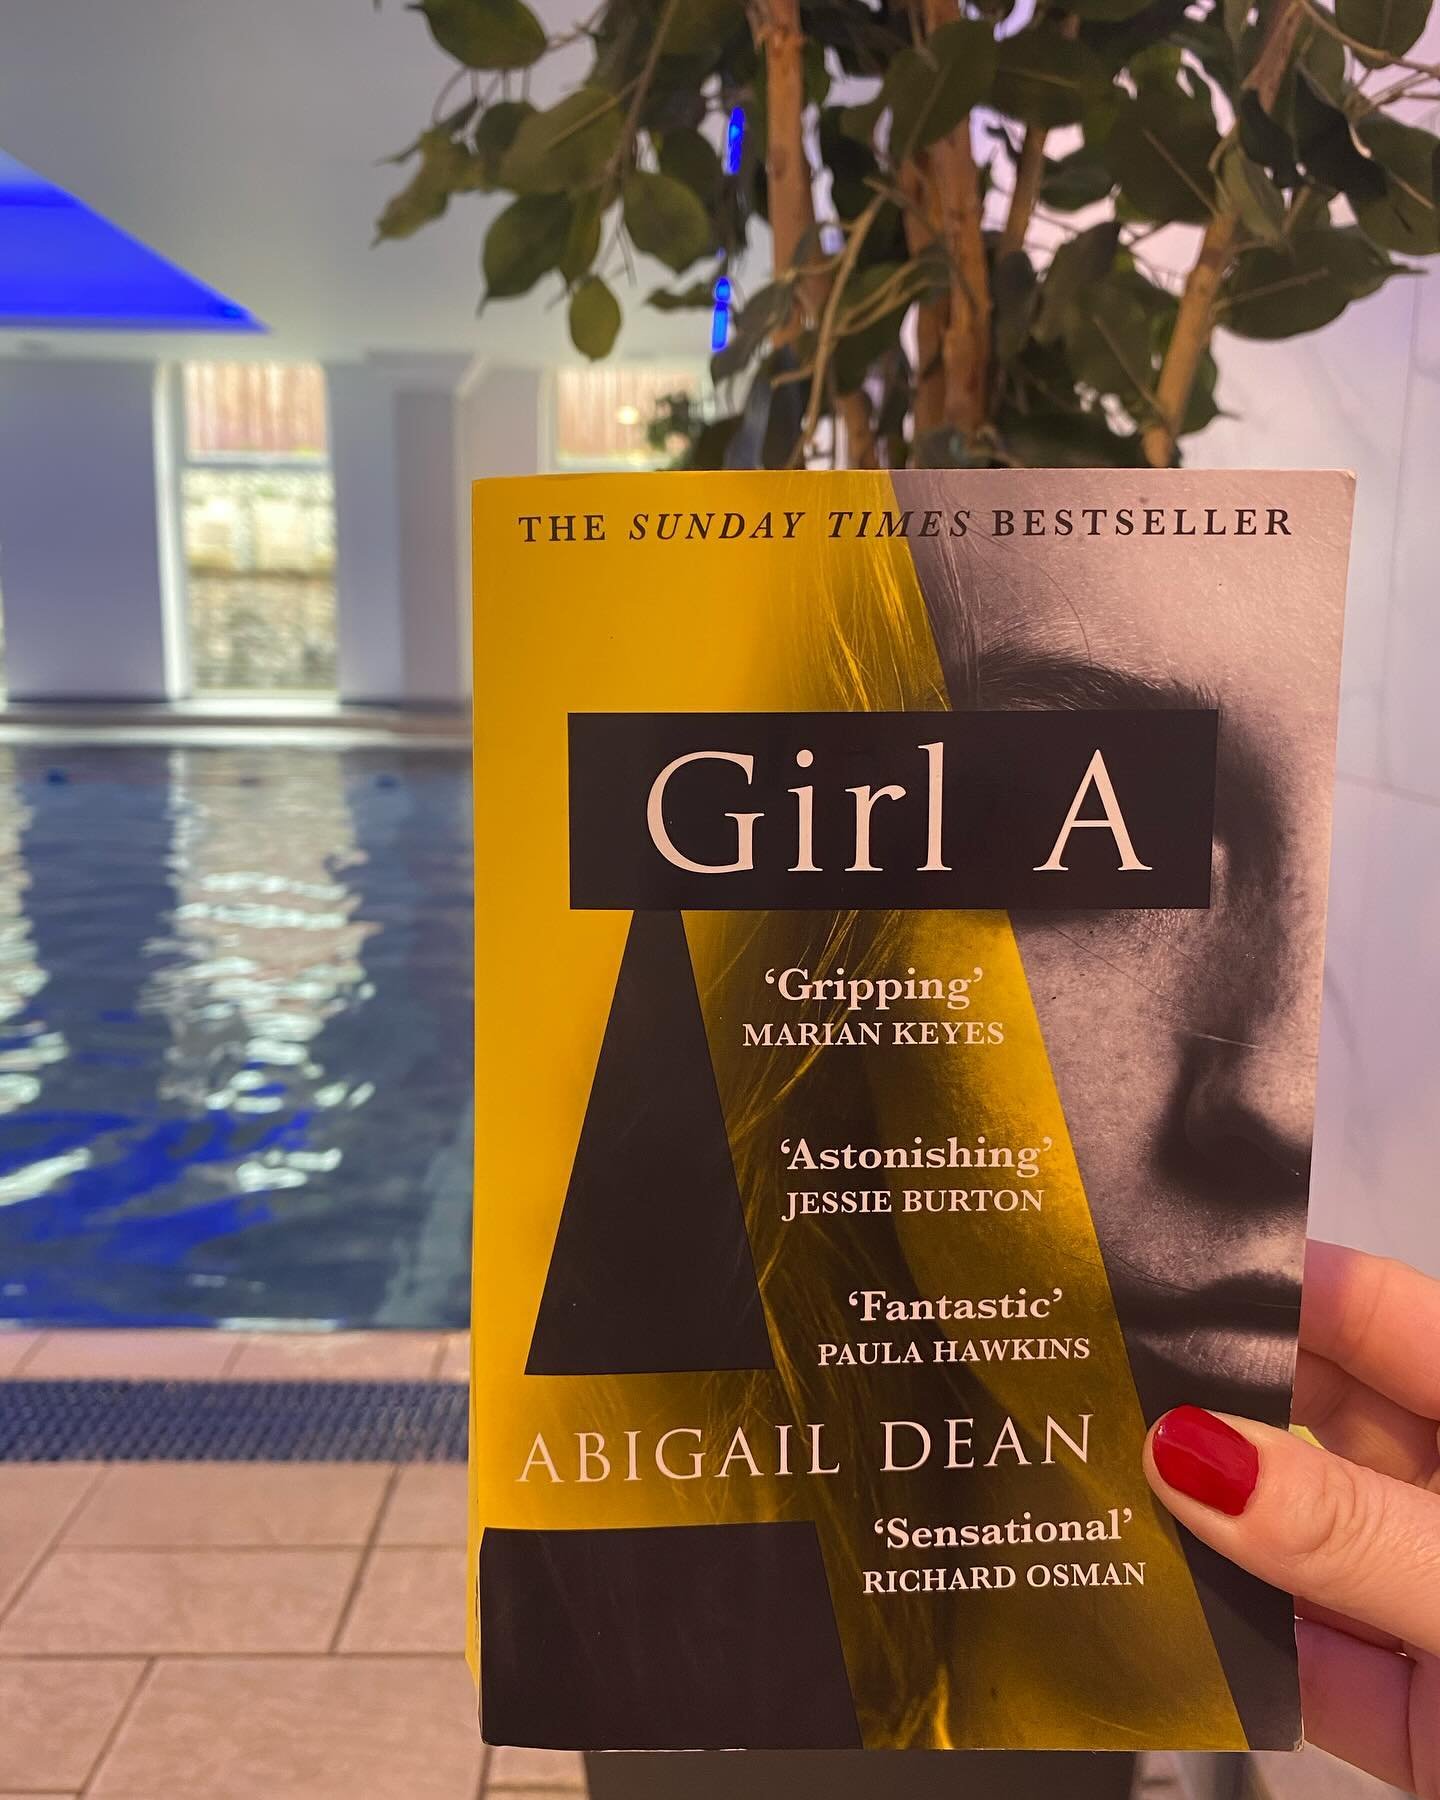 I know I'm late to the party but I've finally started this beauty by @abigailsdean 💛

A few pages in and it's already giving me *Criminal Minds* vibes which I used to LOVE! I'm either 100% romance or 100% serial killer when it comes to my light ente